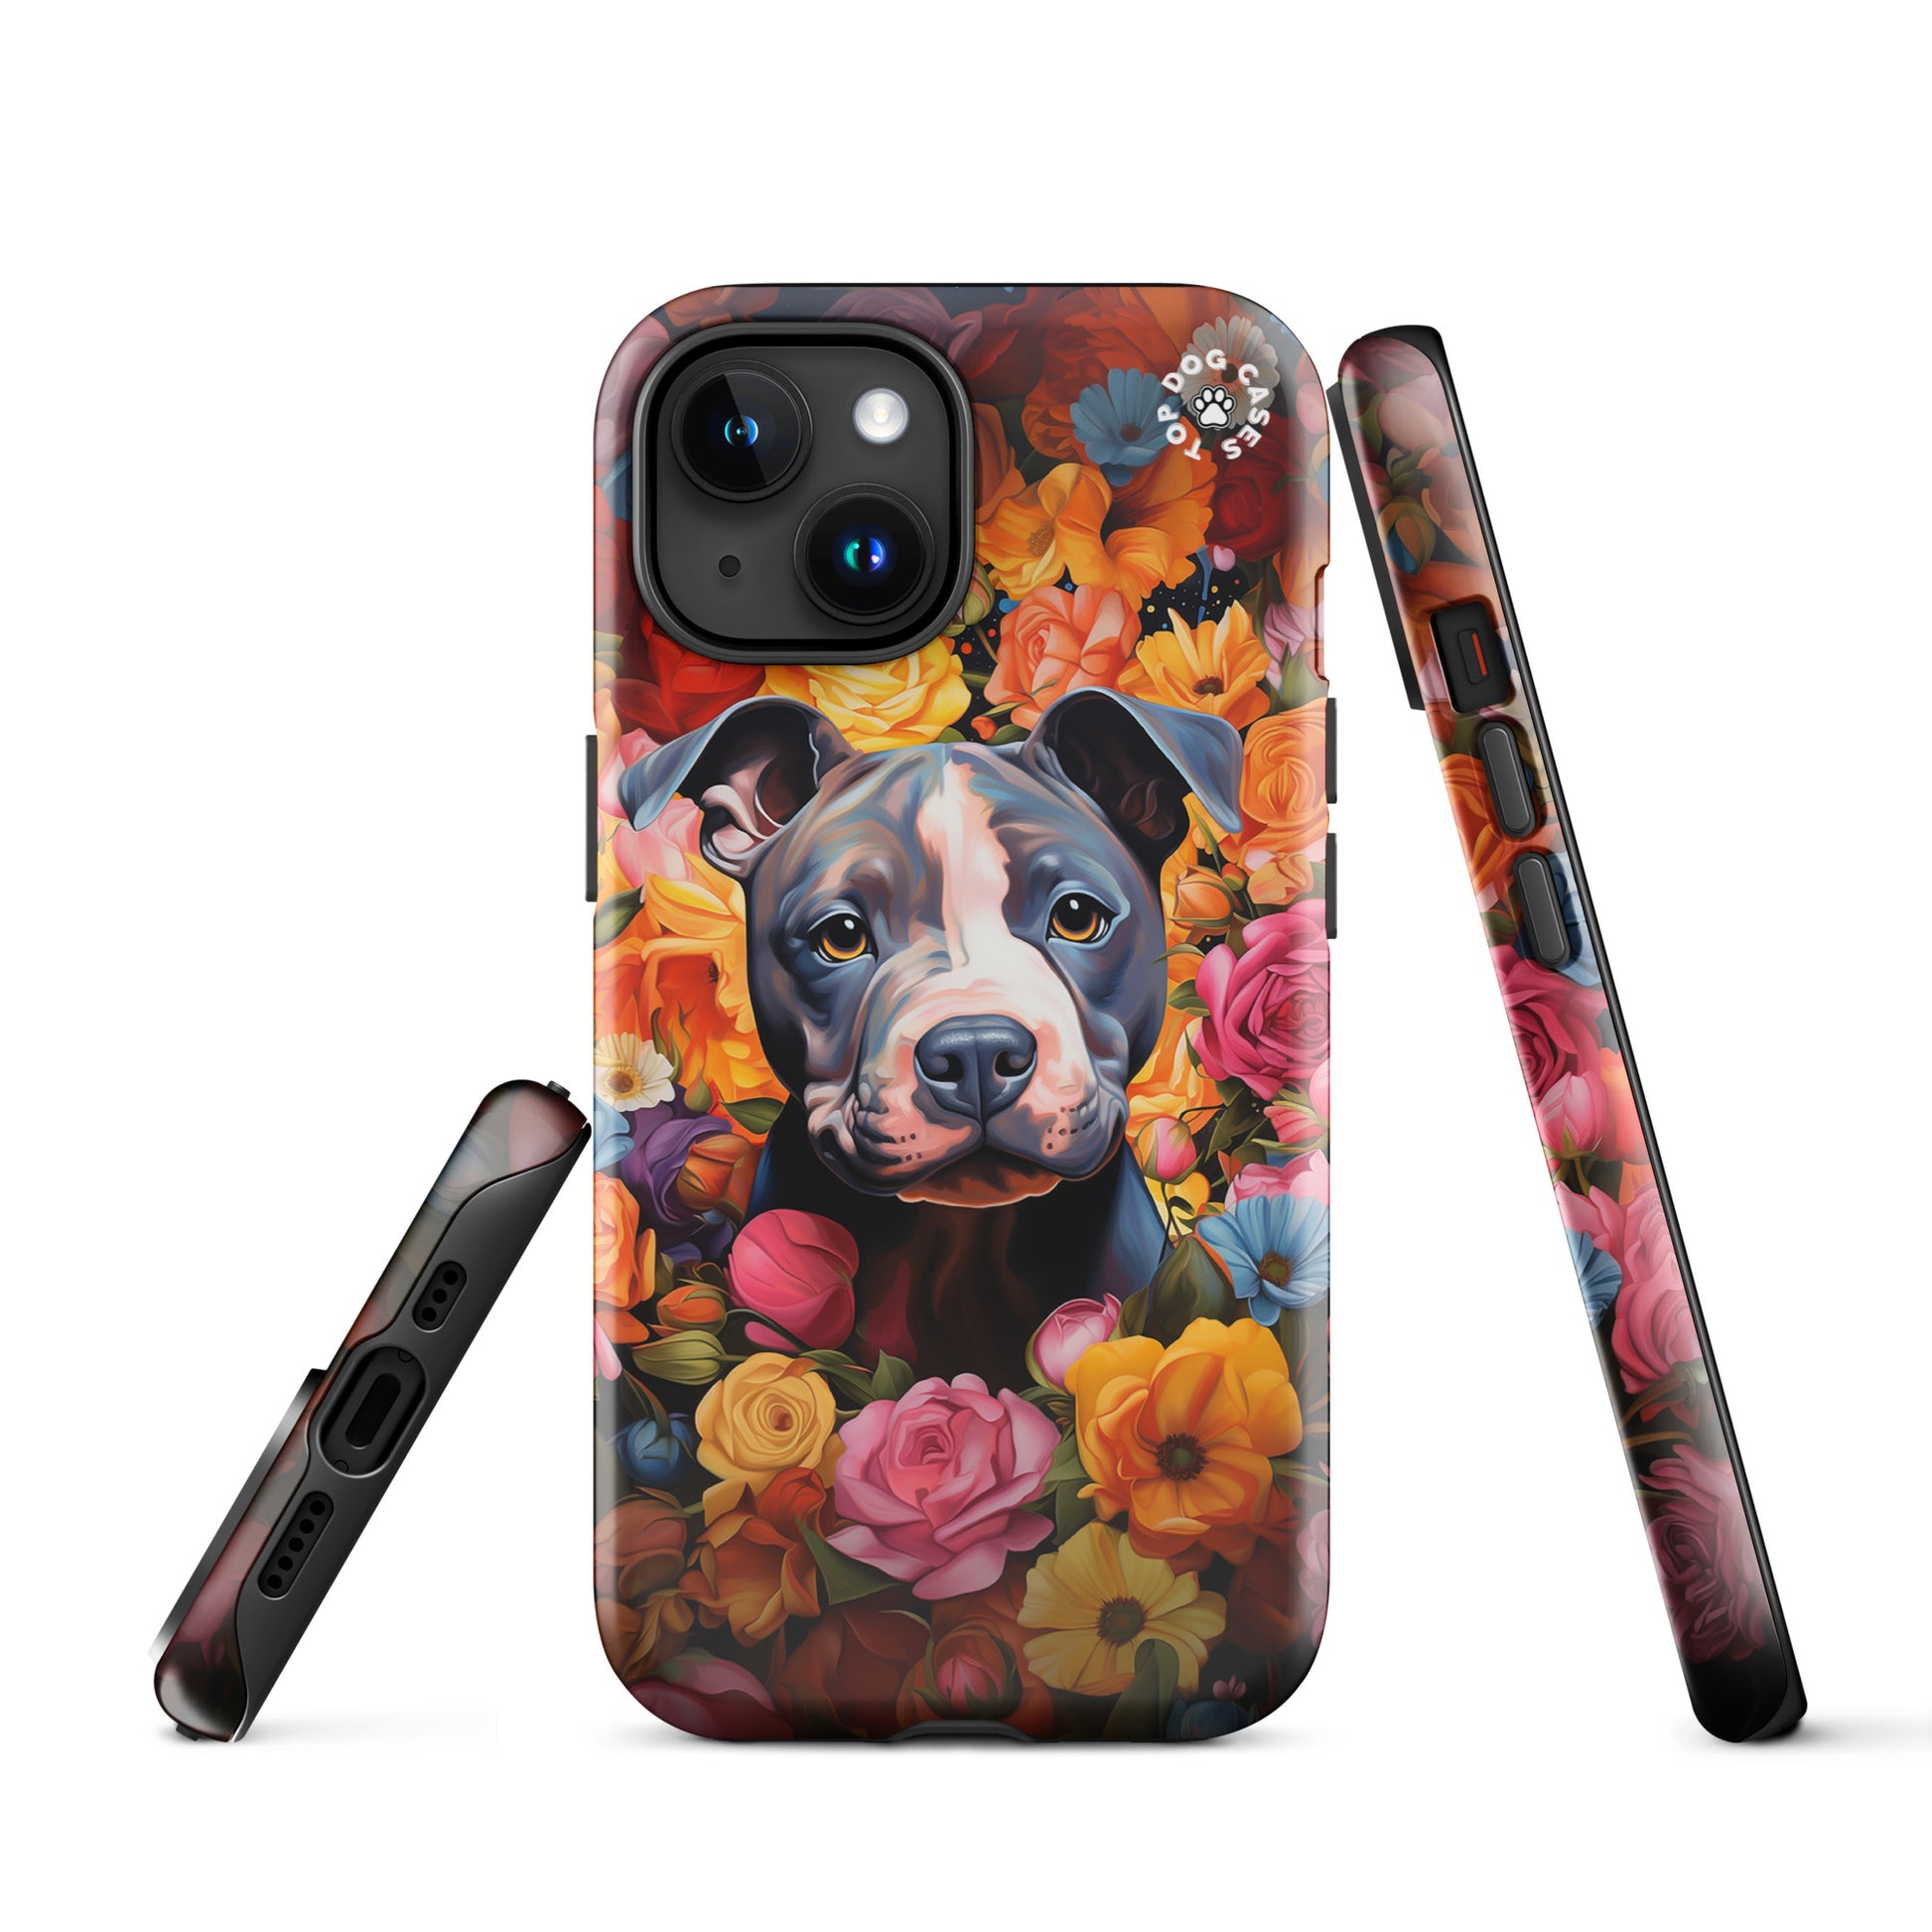 Pitbull Around Flowers Tough Case for iPhone - Top Dog Cases - #CuteDog, #CuteDogs, #DogPhoneCase, #DogsAndFlowers, #Flowers, #iPhone, #iPhone11, #iphone11case, #iPhone12, #iPhone12case, #iPhone13, #iPhone13case, #iPhone13DogCase, #iPhone13Mini, #iPhone13Pro, #iPhone13ProMax, #iPhone14, #iPhone14case, #iPhone14DogCase, #iPhone14Plus, #iPhone14Pluscase, #iPhone14Pro, #iPhone14ProMax, #iPhone14ProMaxCase, #iPhone15, #iPhone15case, #iPhonecase, #iphonedogcase, #Pitbull